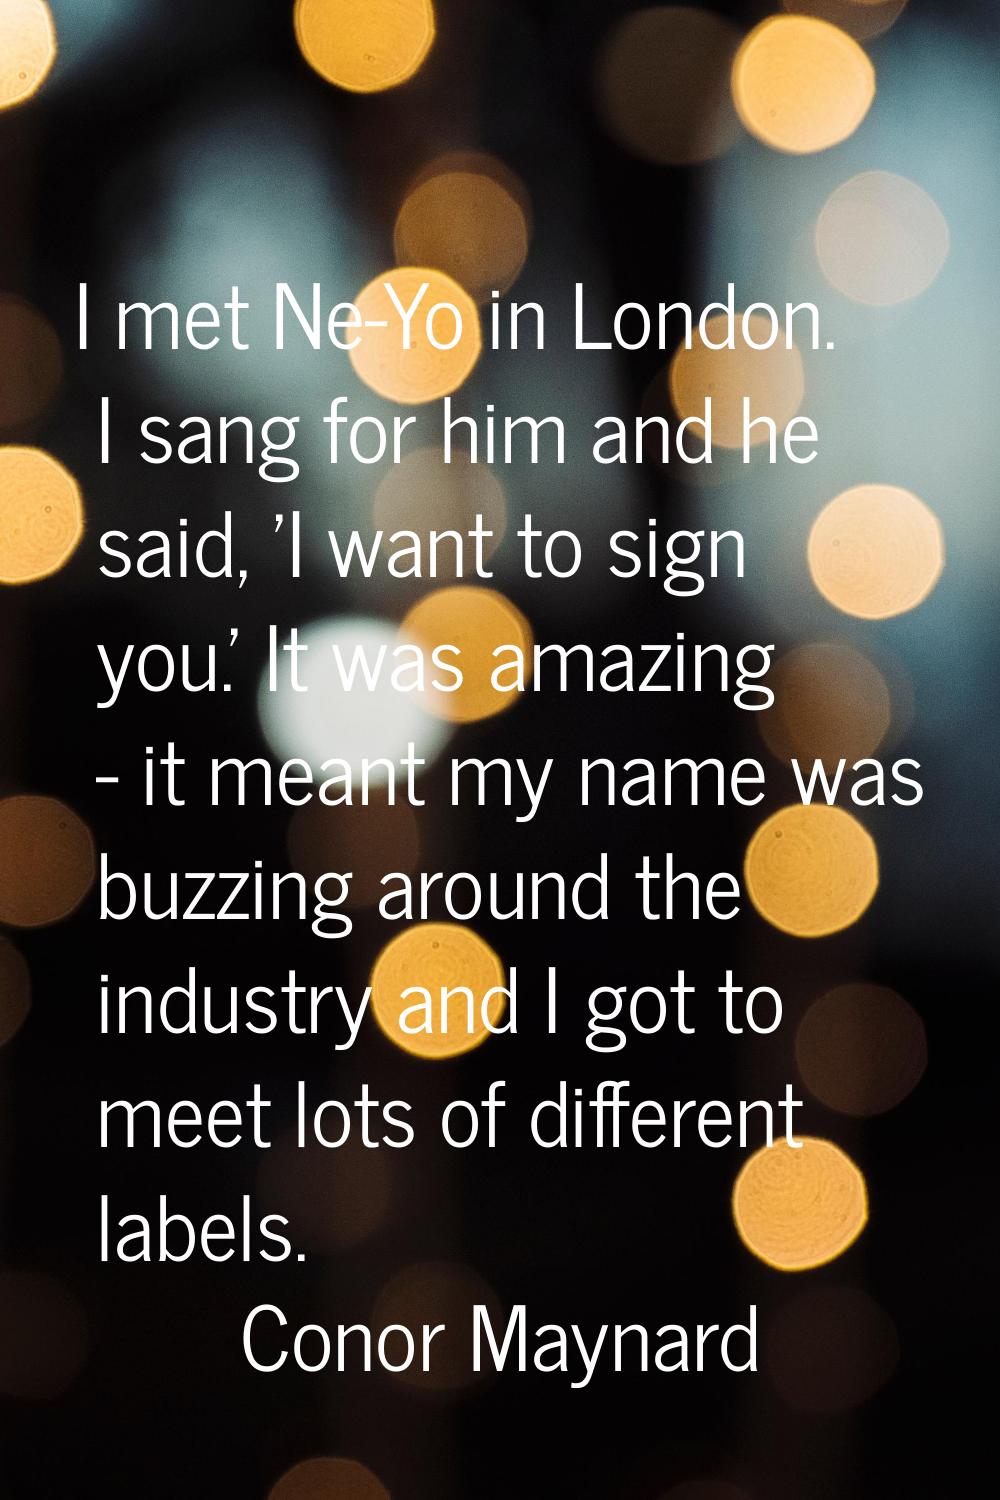 I met Ne-Yo in London. I sang for him and he said, 'I want to sign you.' It was amazing - it meant 